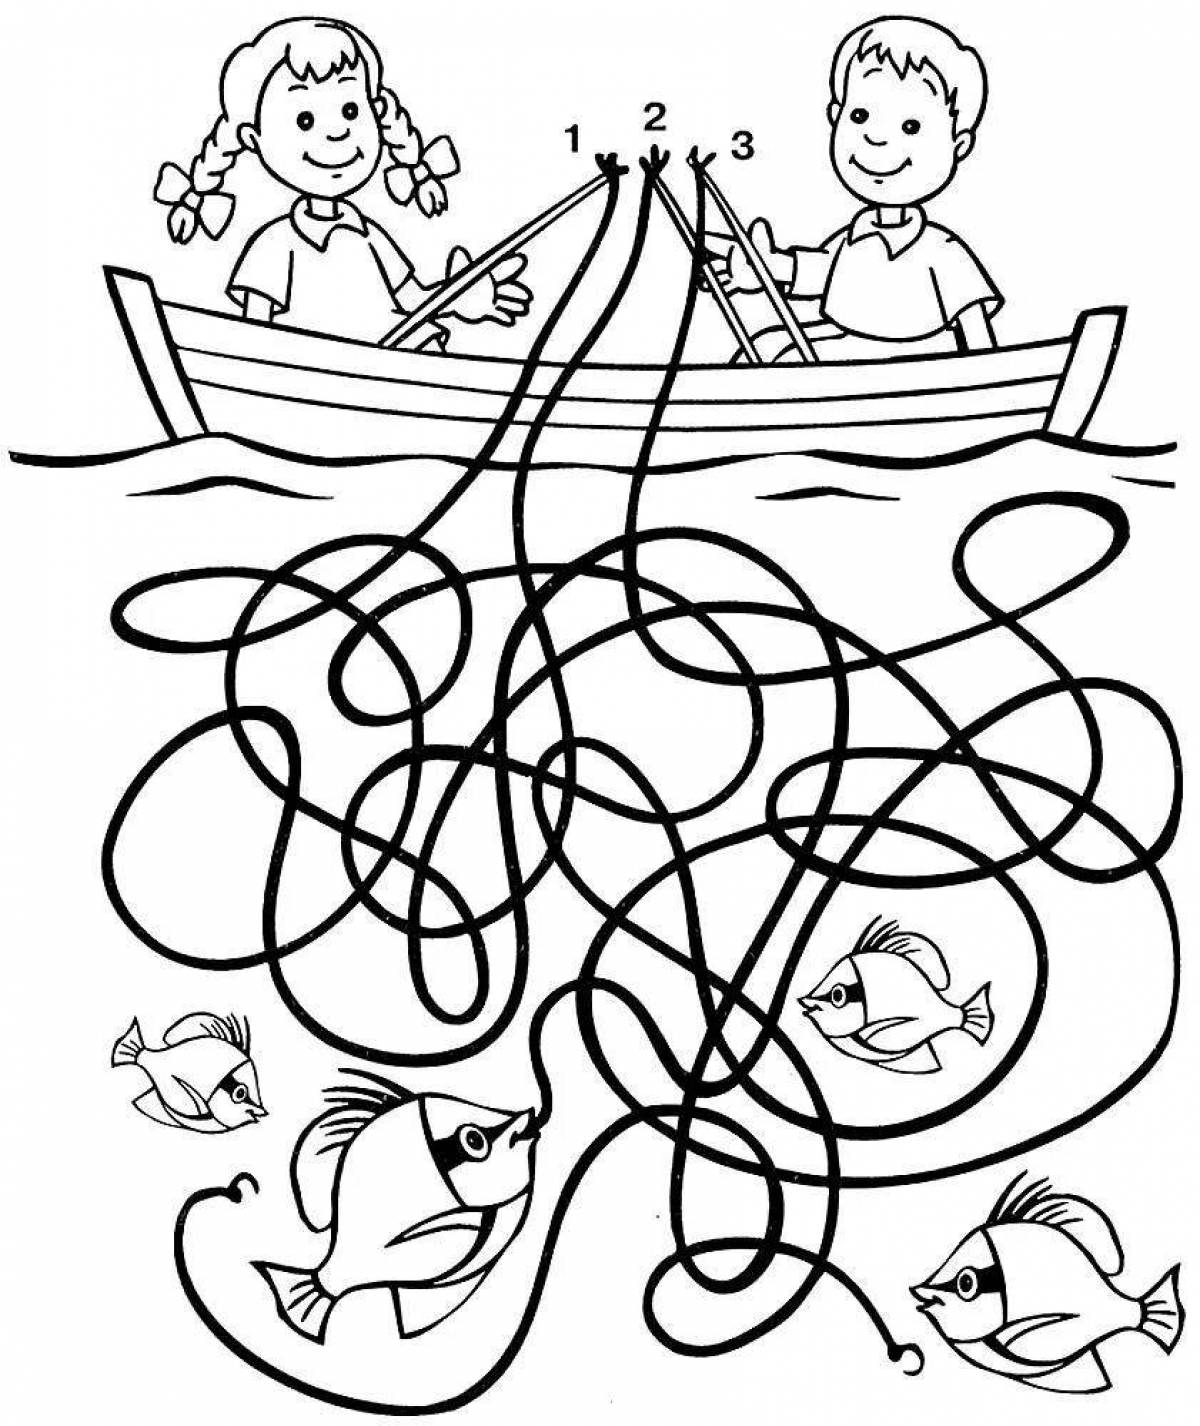 Delightful confusion coloring page